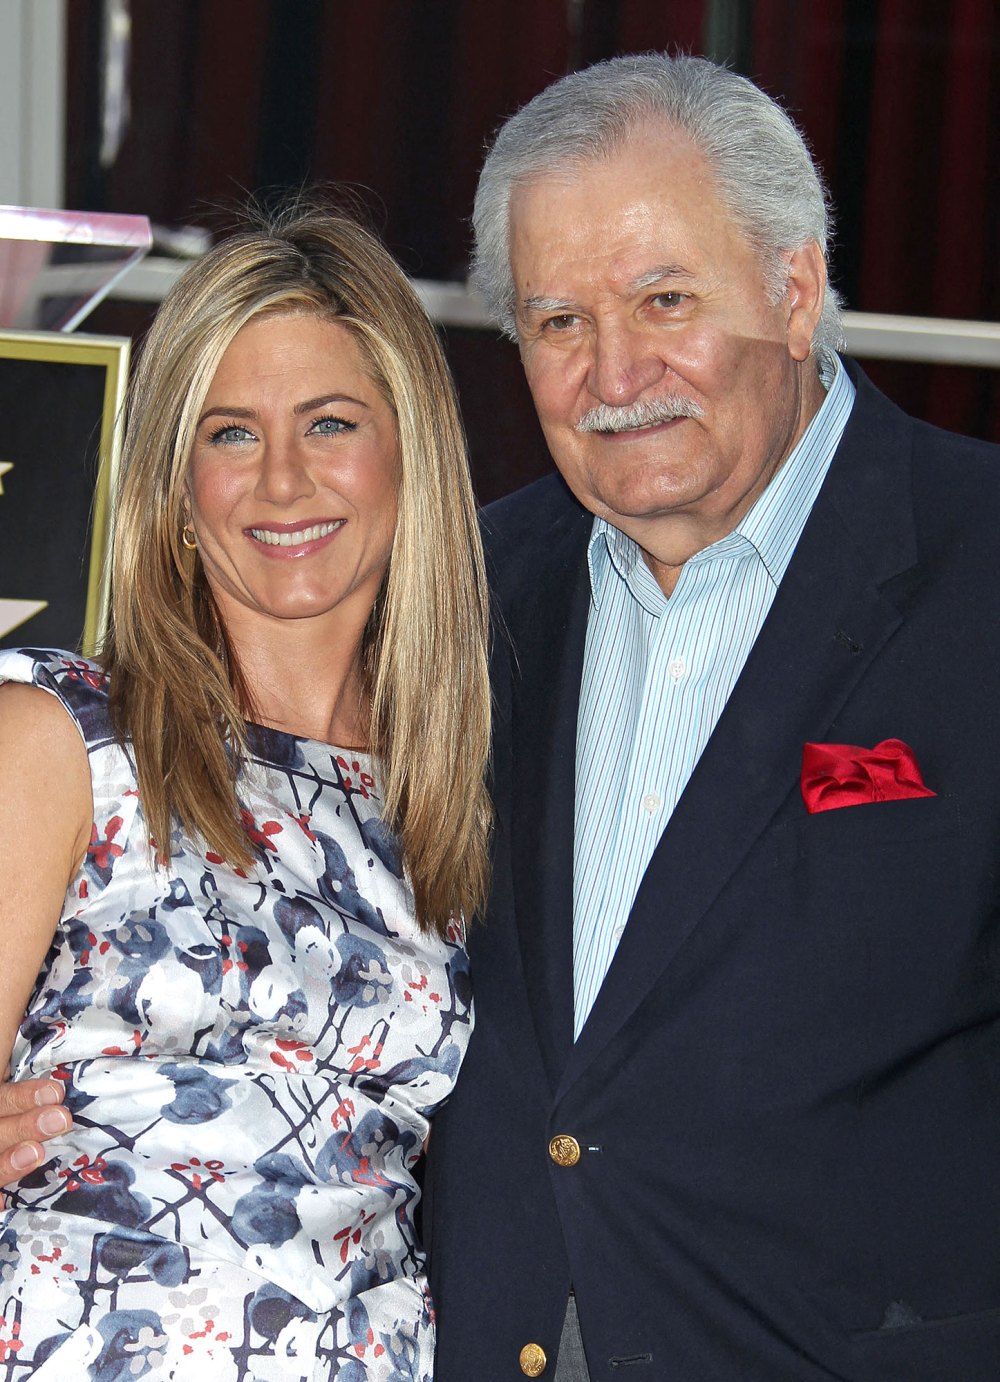 When Will John Aniston's Final Episode of 'Days of Our Lives' Air 2